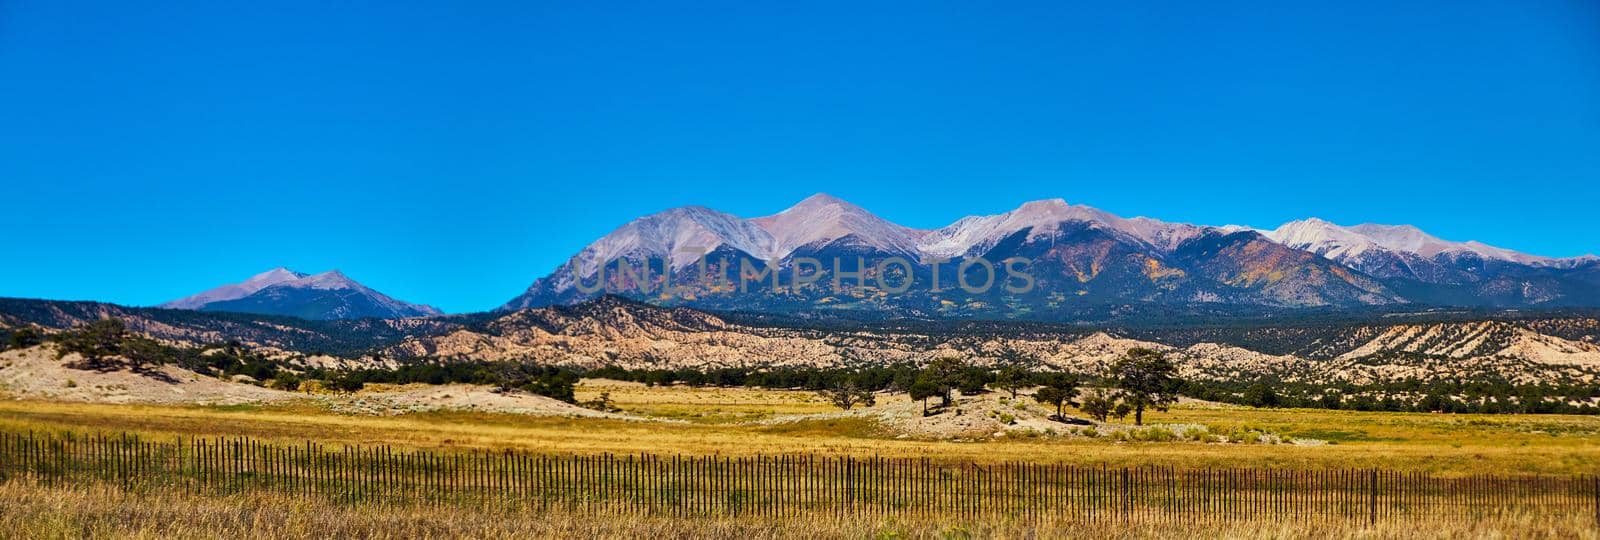 Image of Panorama of midwest mountain range in desert with simple wood fence in foreground